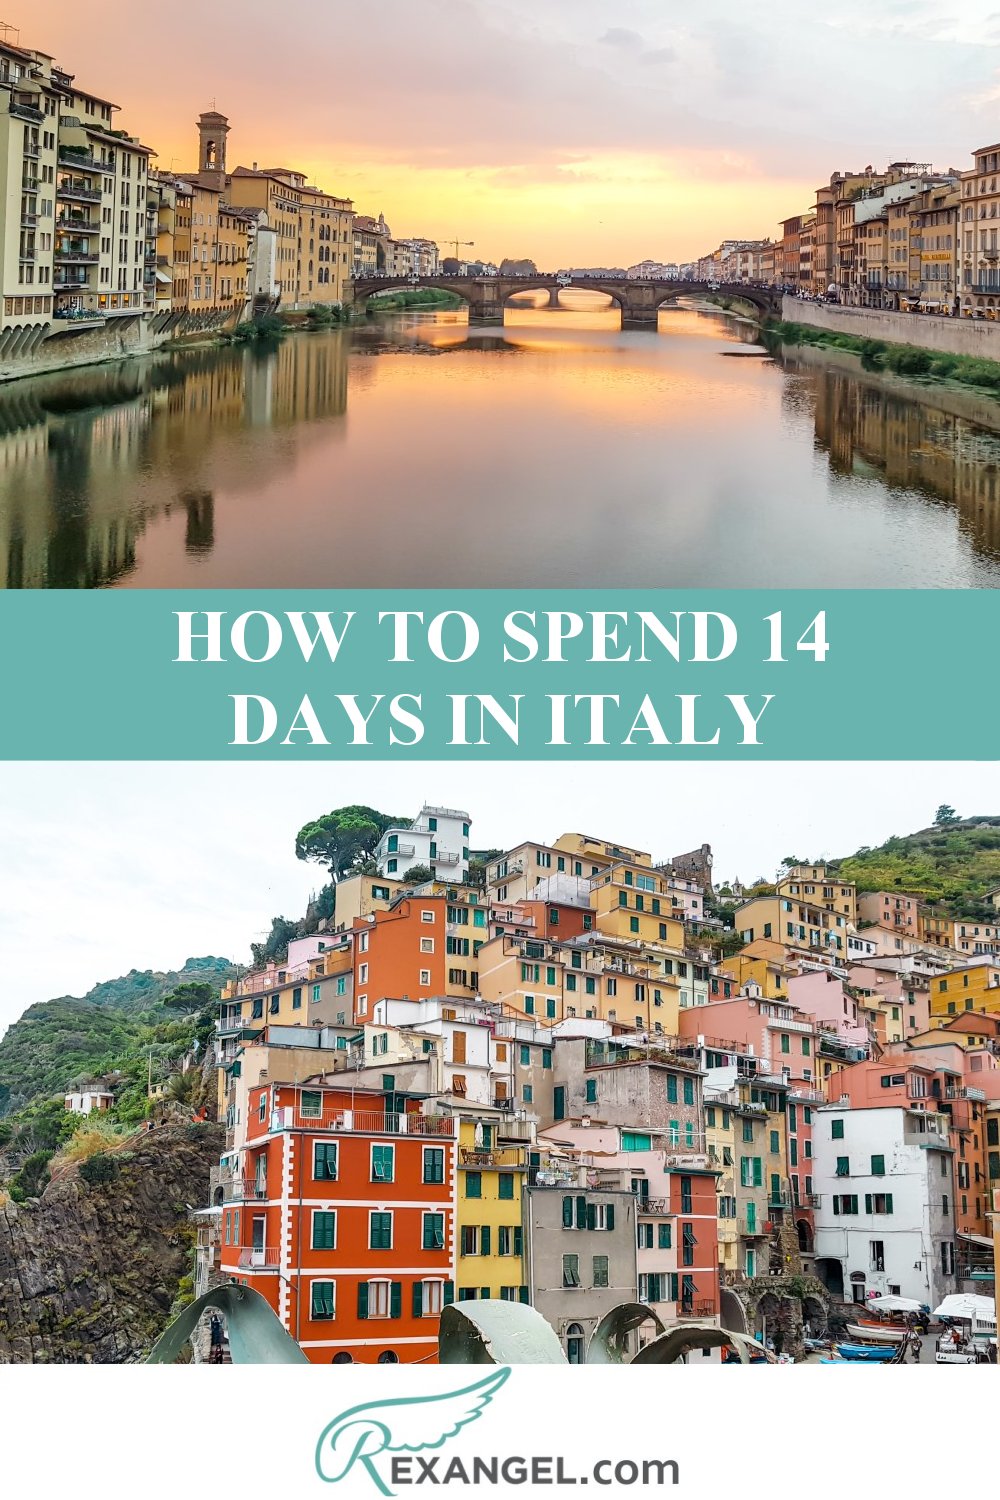 Two Weeks in Italy Itinerary Pinterest Image